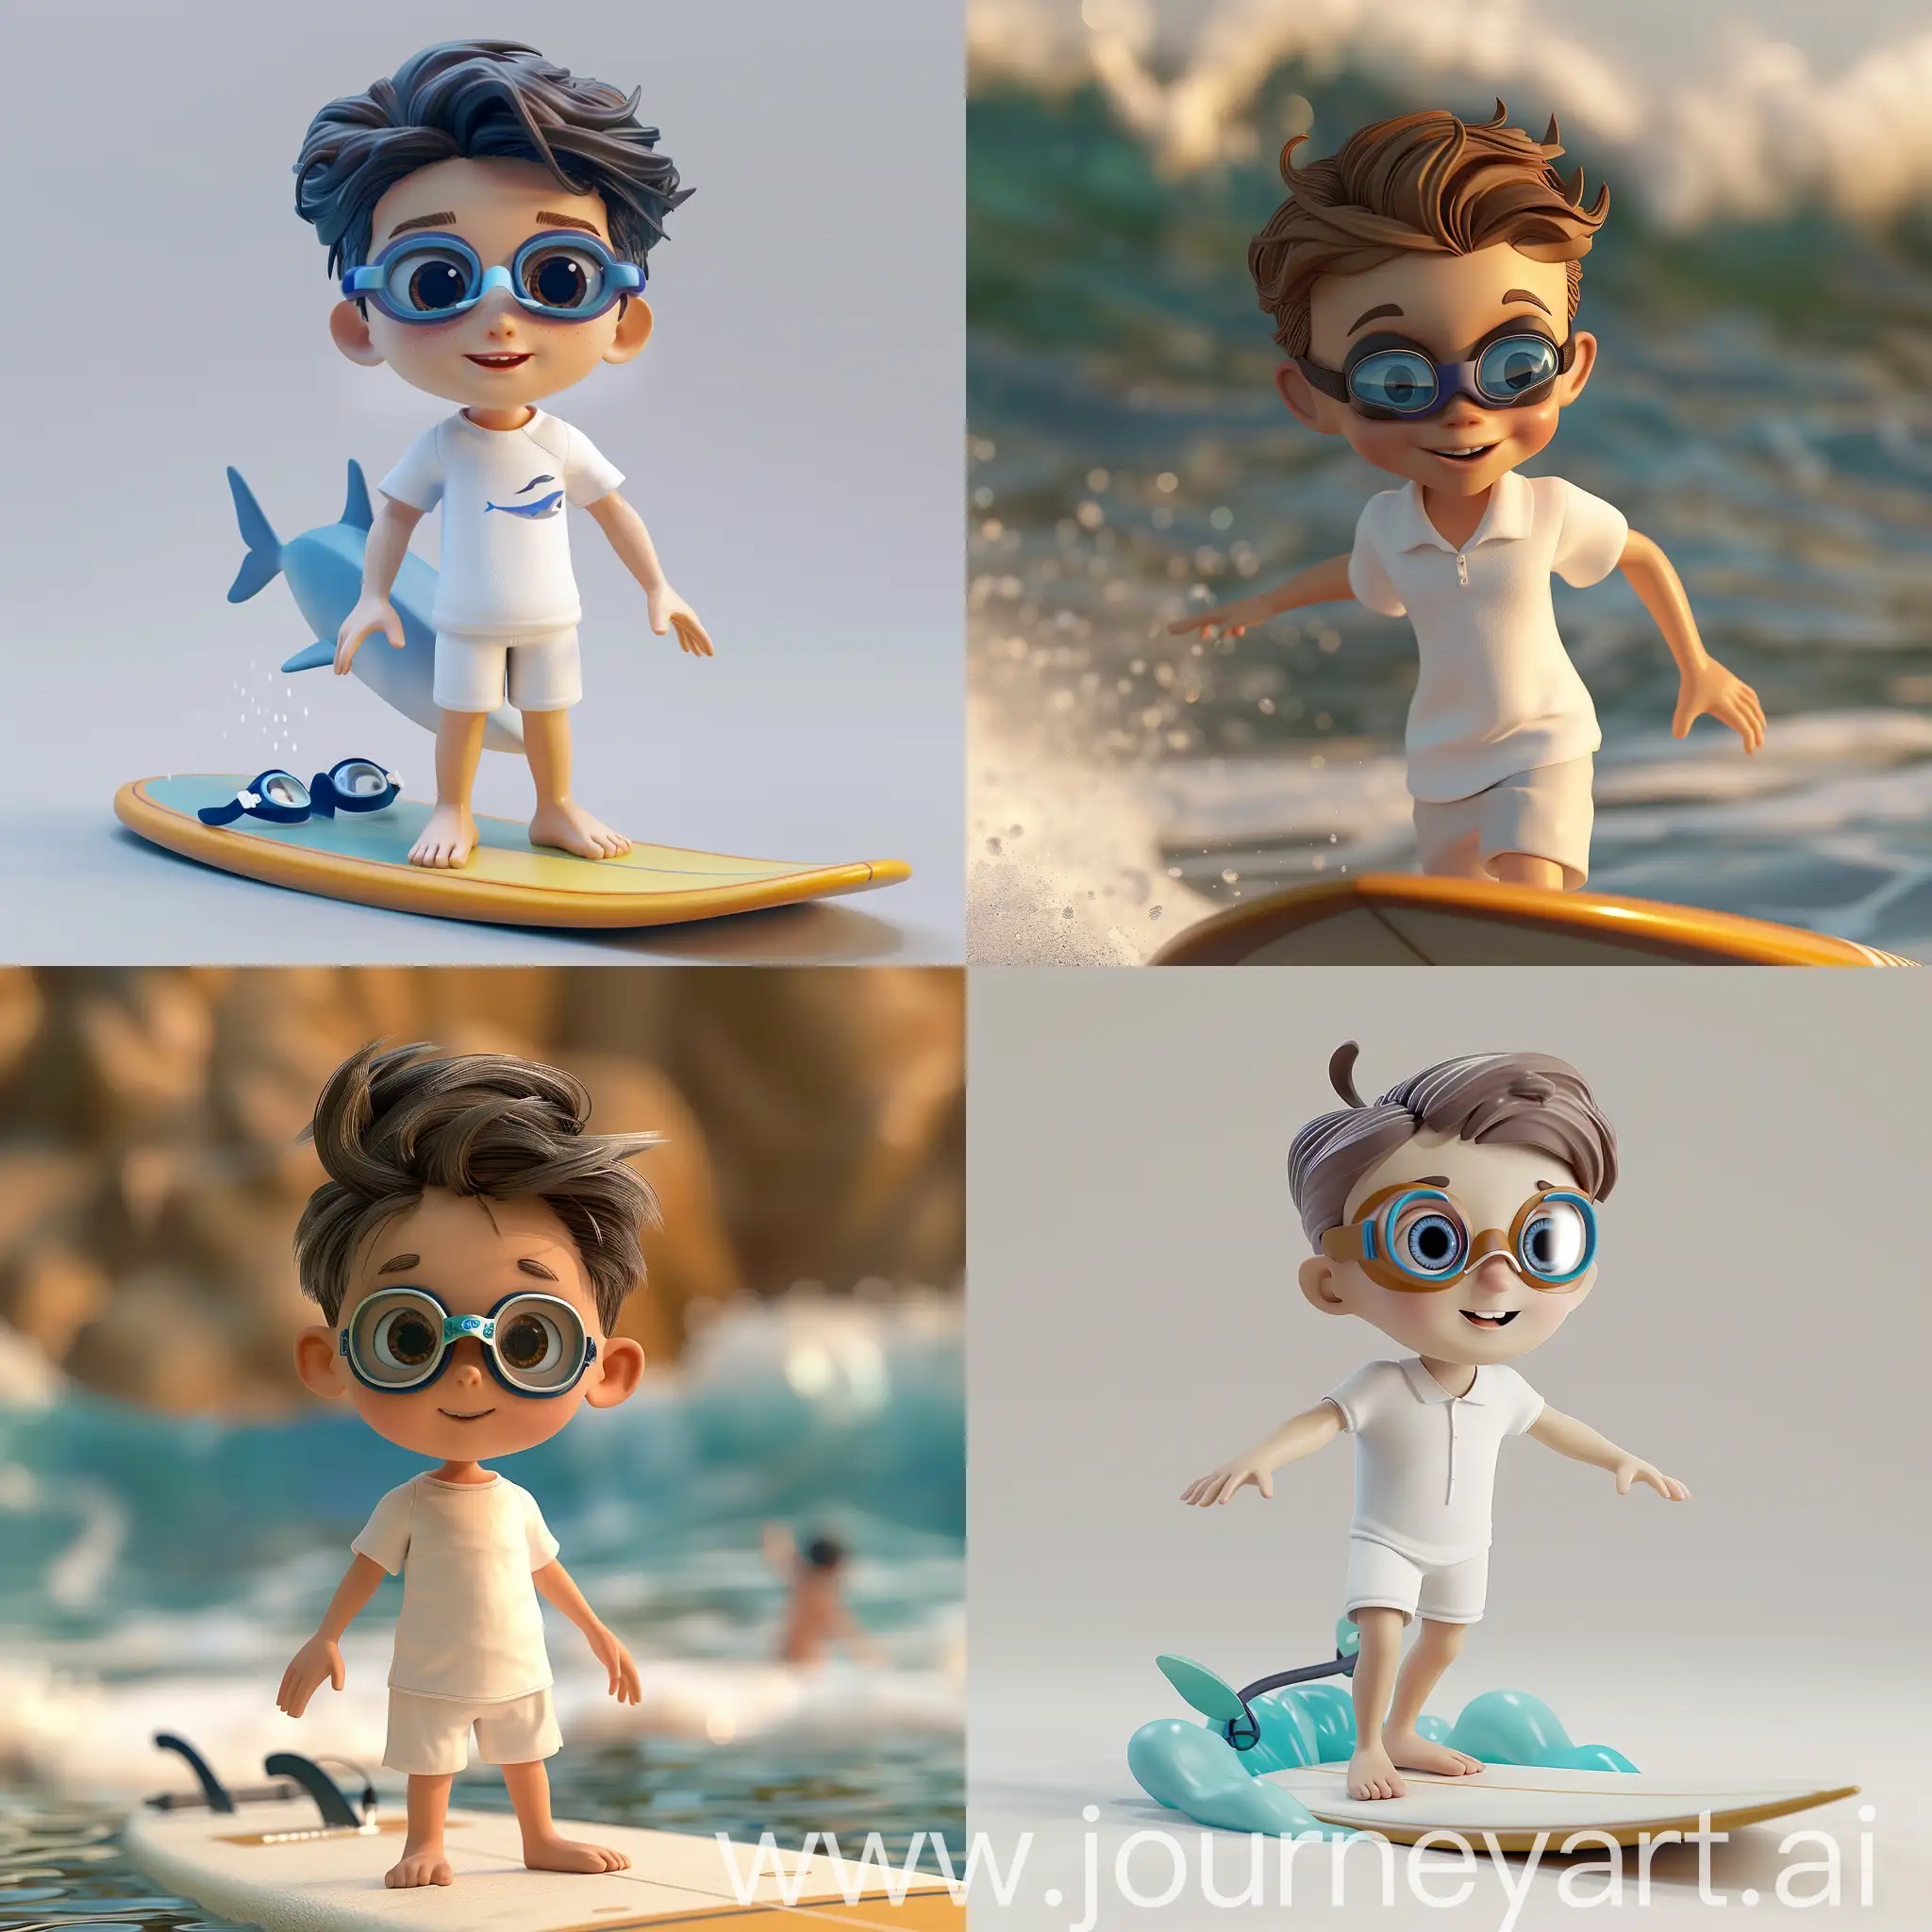 Cute-Boy-Surfing-on-a-HighQuality-3D-Rendered-Board-with-Big-Goggles-and-Mood-Lighting